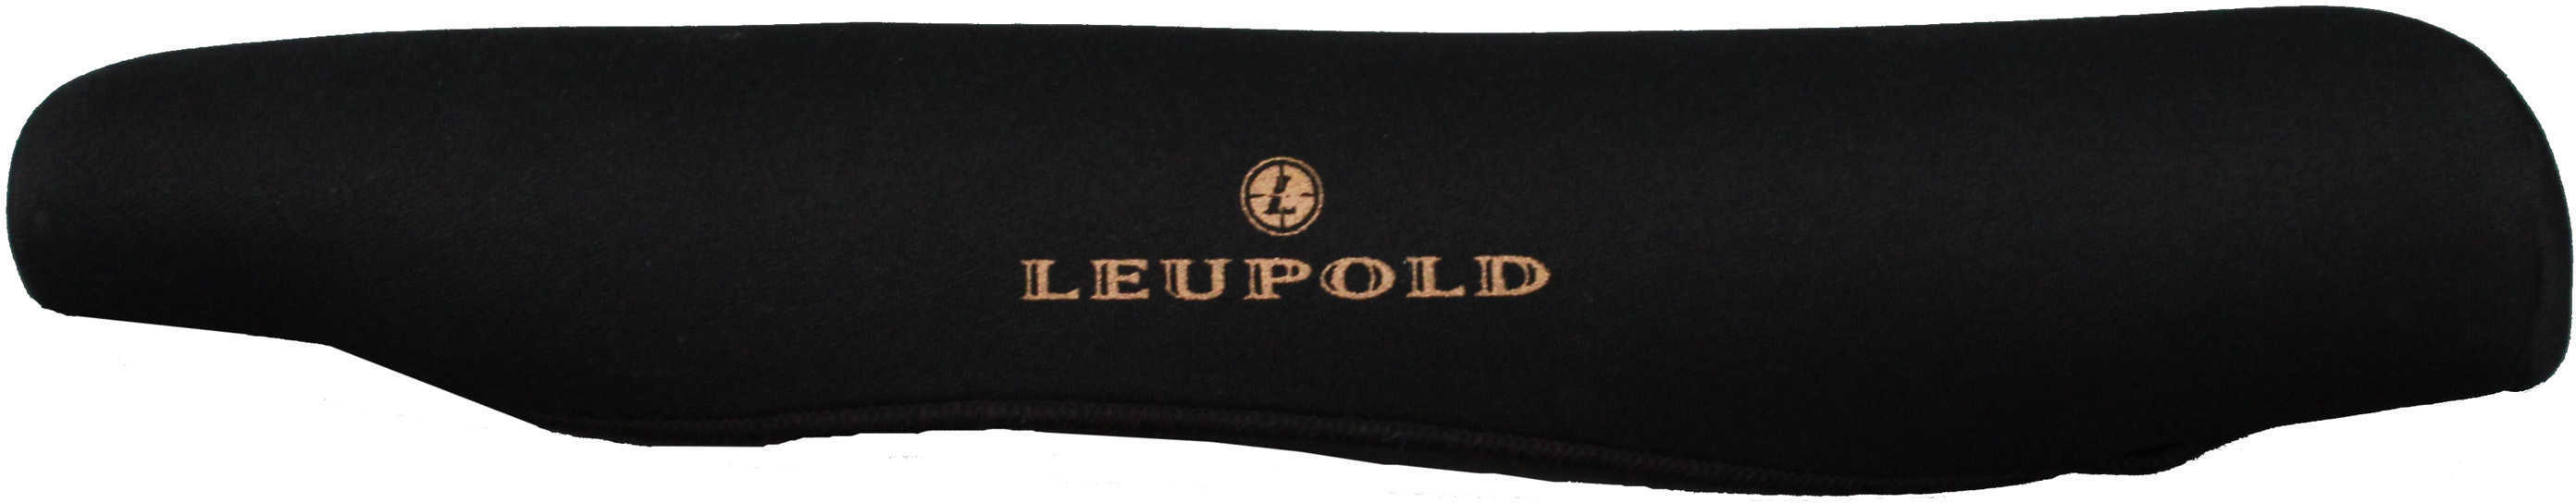 Leupold Scope Cover XX-Large